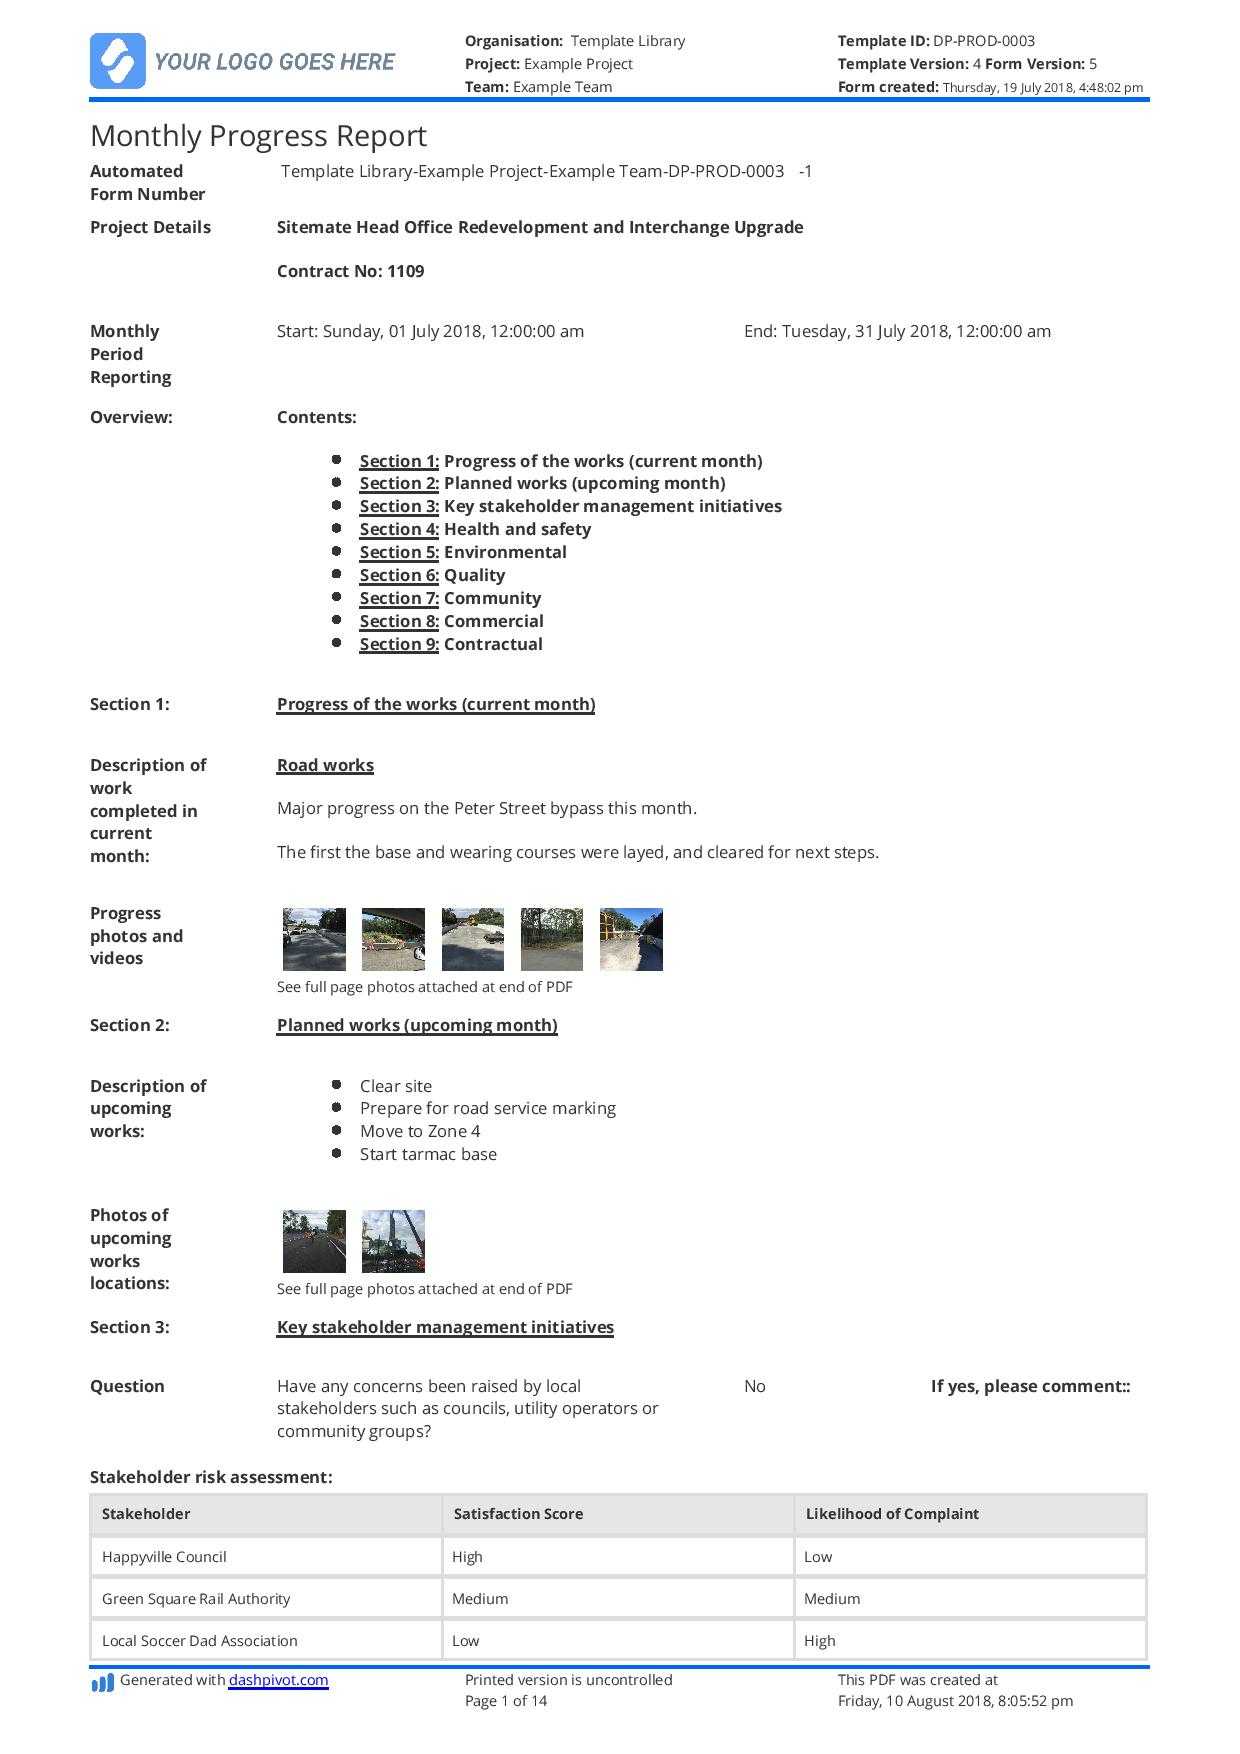 Monthly Construction Progress Report Template: Use This For Monthly Activity Report Template